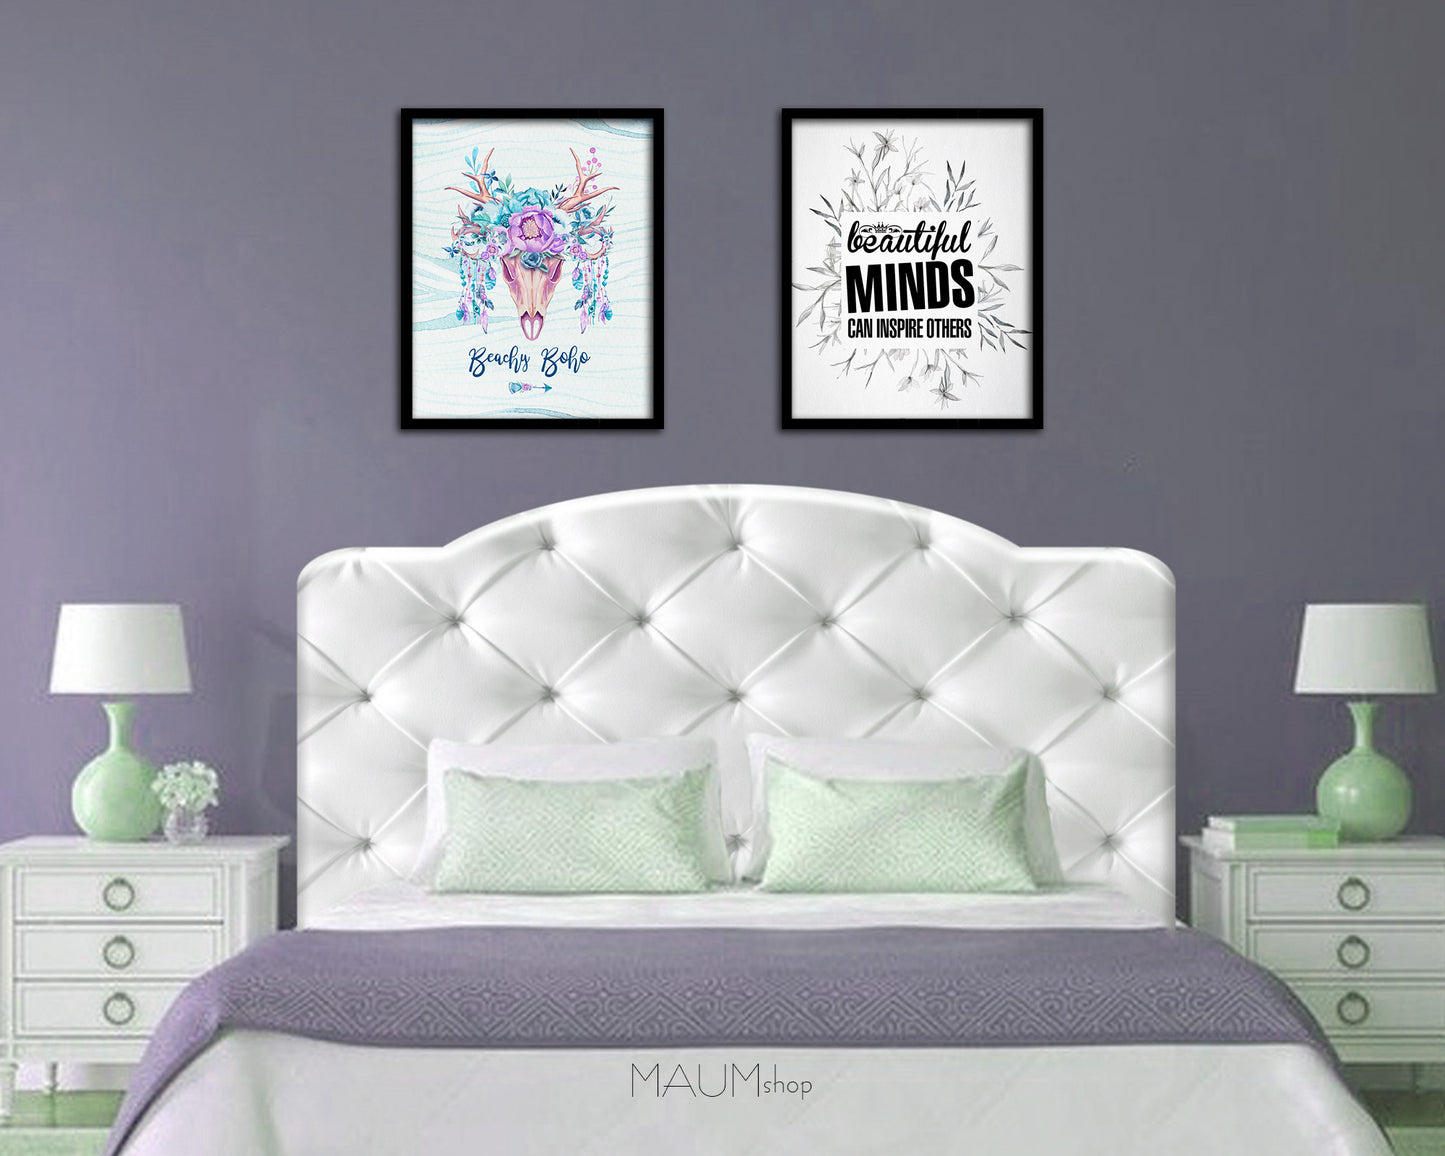 Beautiful minds can inspire others Quote Framed Print Wall Decor Art Gifts